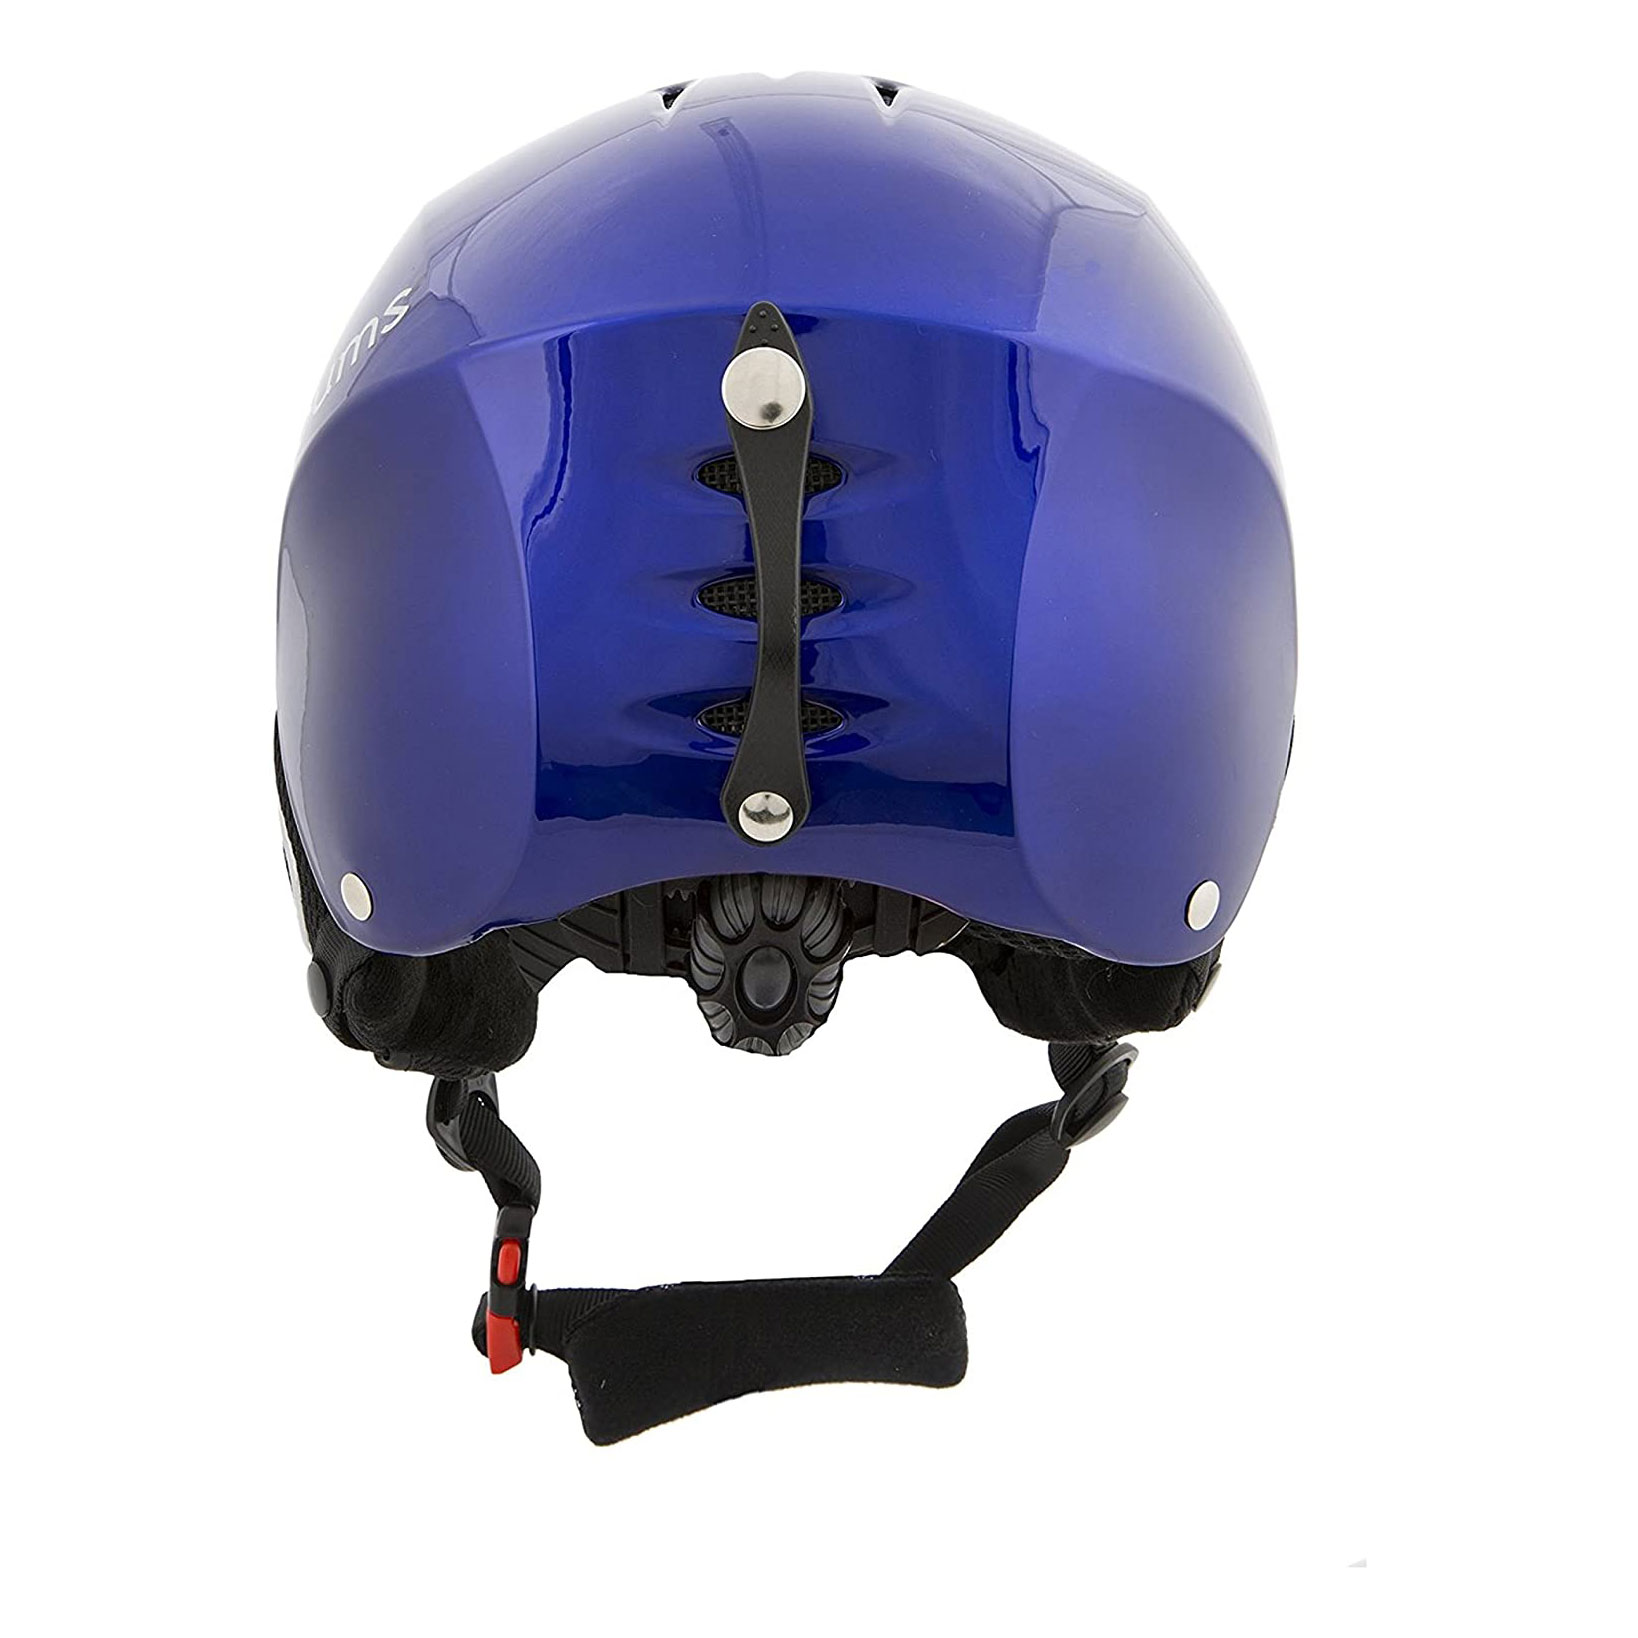 Lucky Bums Snow Sport Helmet, Blue, Large - image 3 of 7